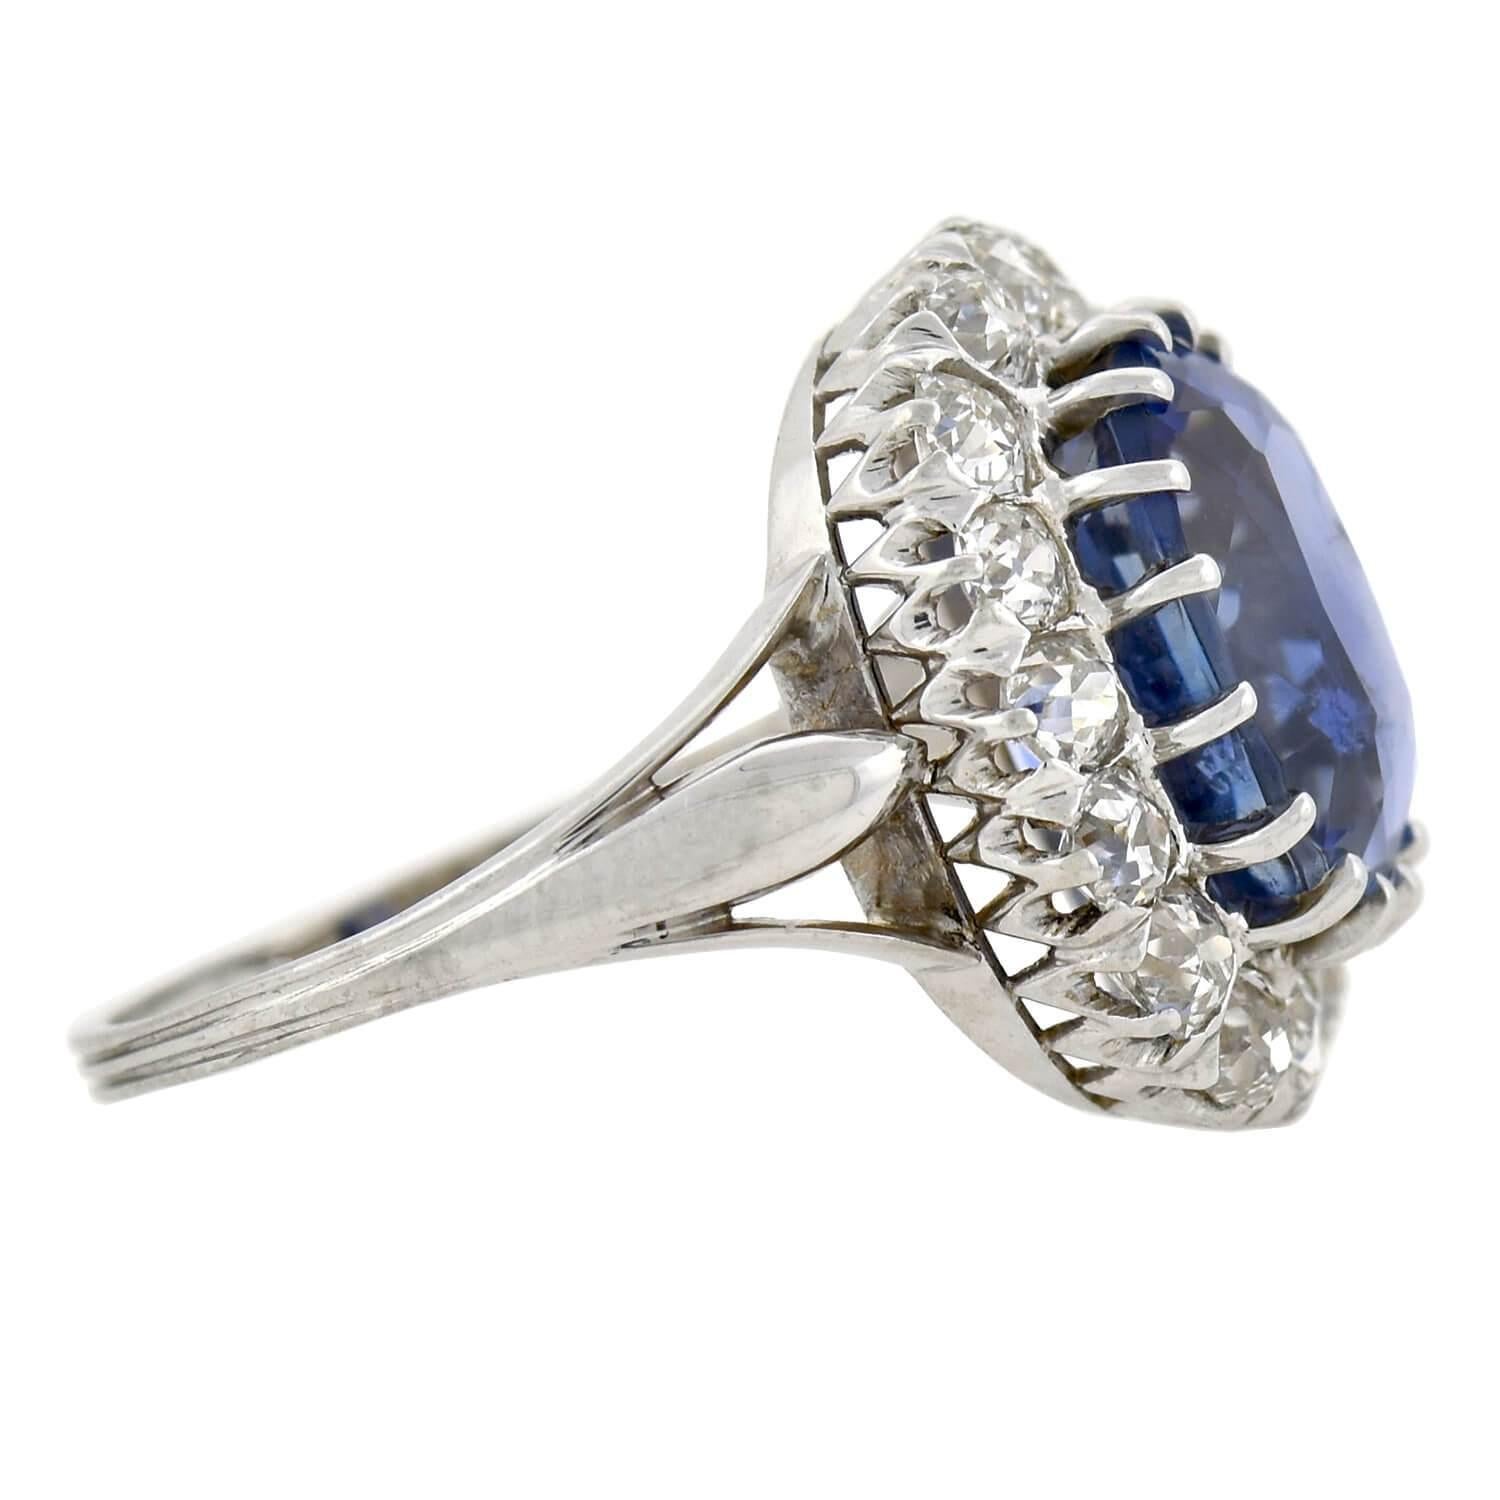 A truly spectacular sapphire and diamond ring from the Art Deco (ca1925) era! This Swedish-made piece is crafted in platinum and adorns an approximately 5.10ct Ceylon sapphire at the center of a sparkling diamond border. The stunning multi-prong set